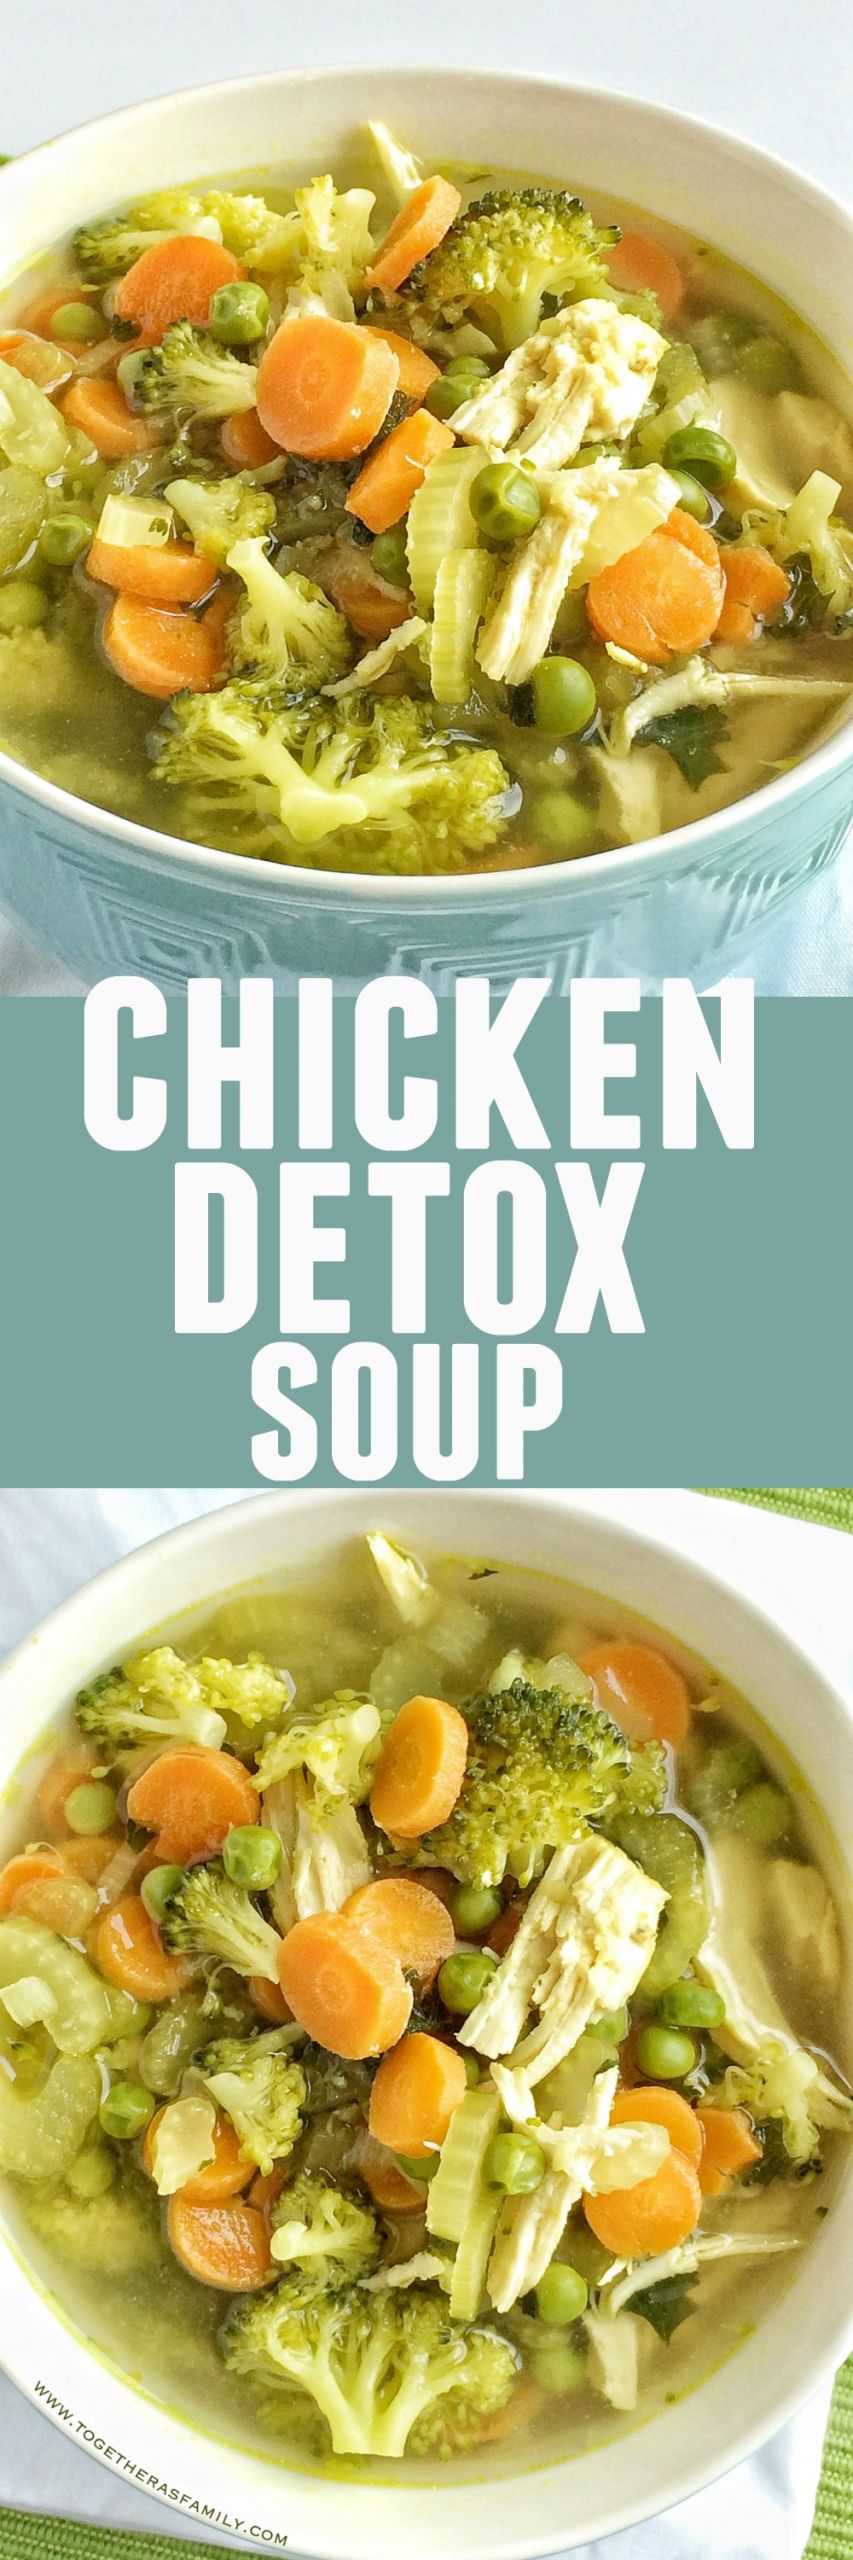 Low Calorie Chicken Soup Recipes
 Chicken Detox Soup To her as Family